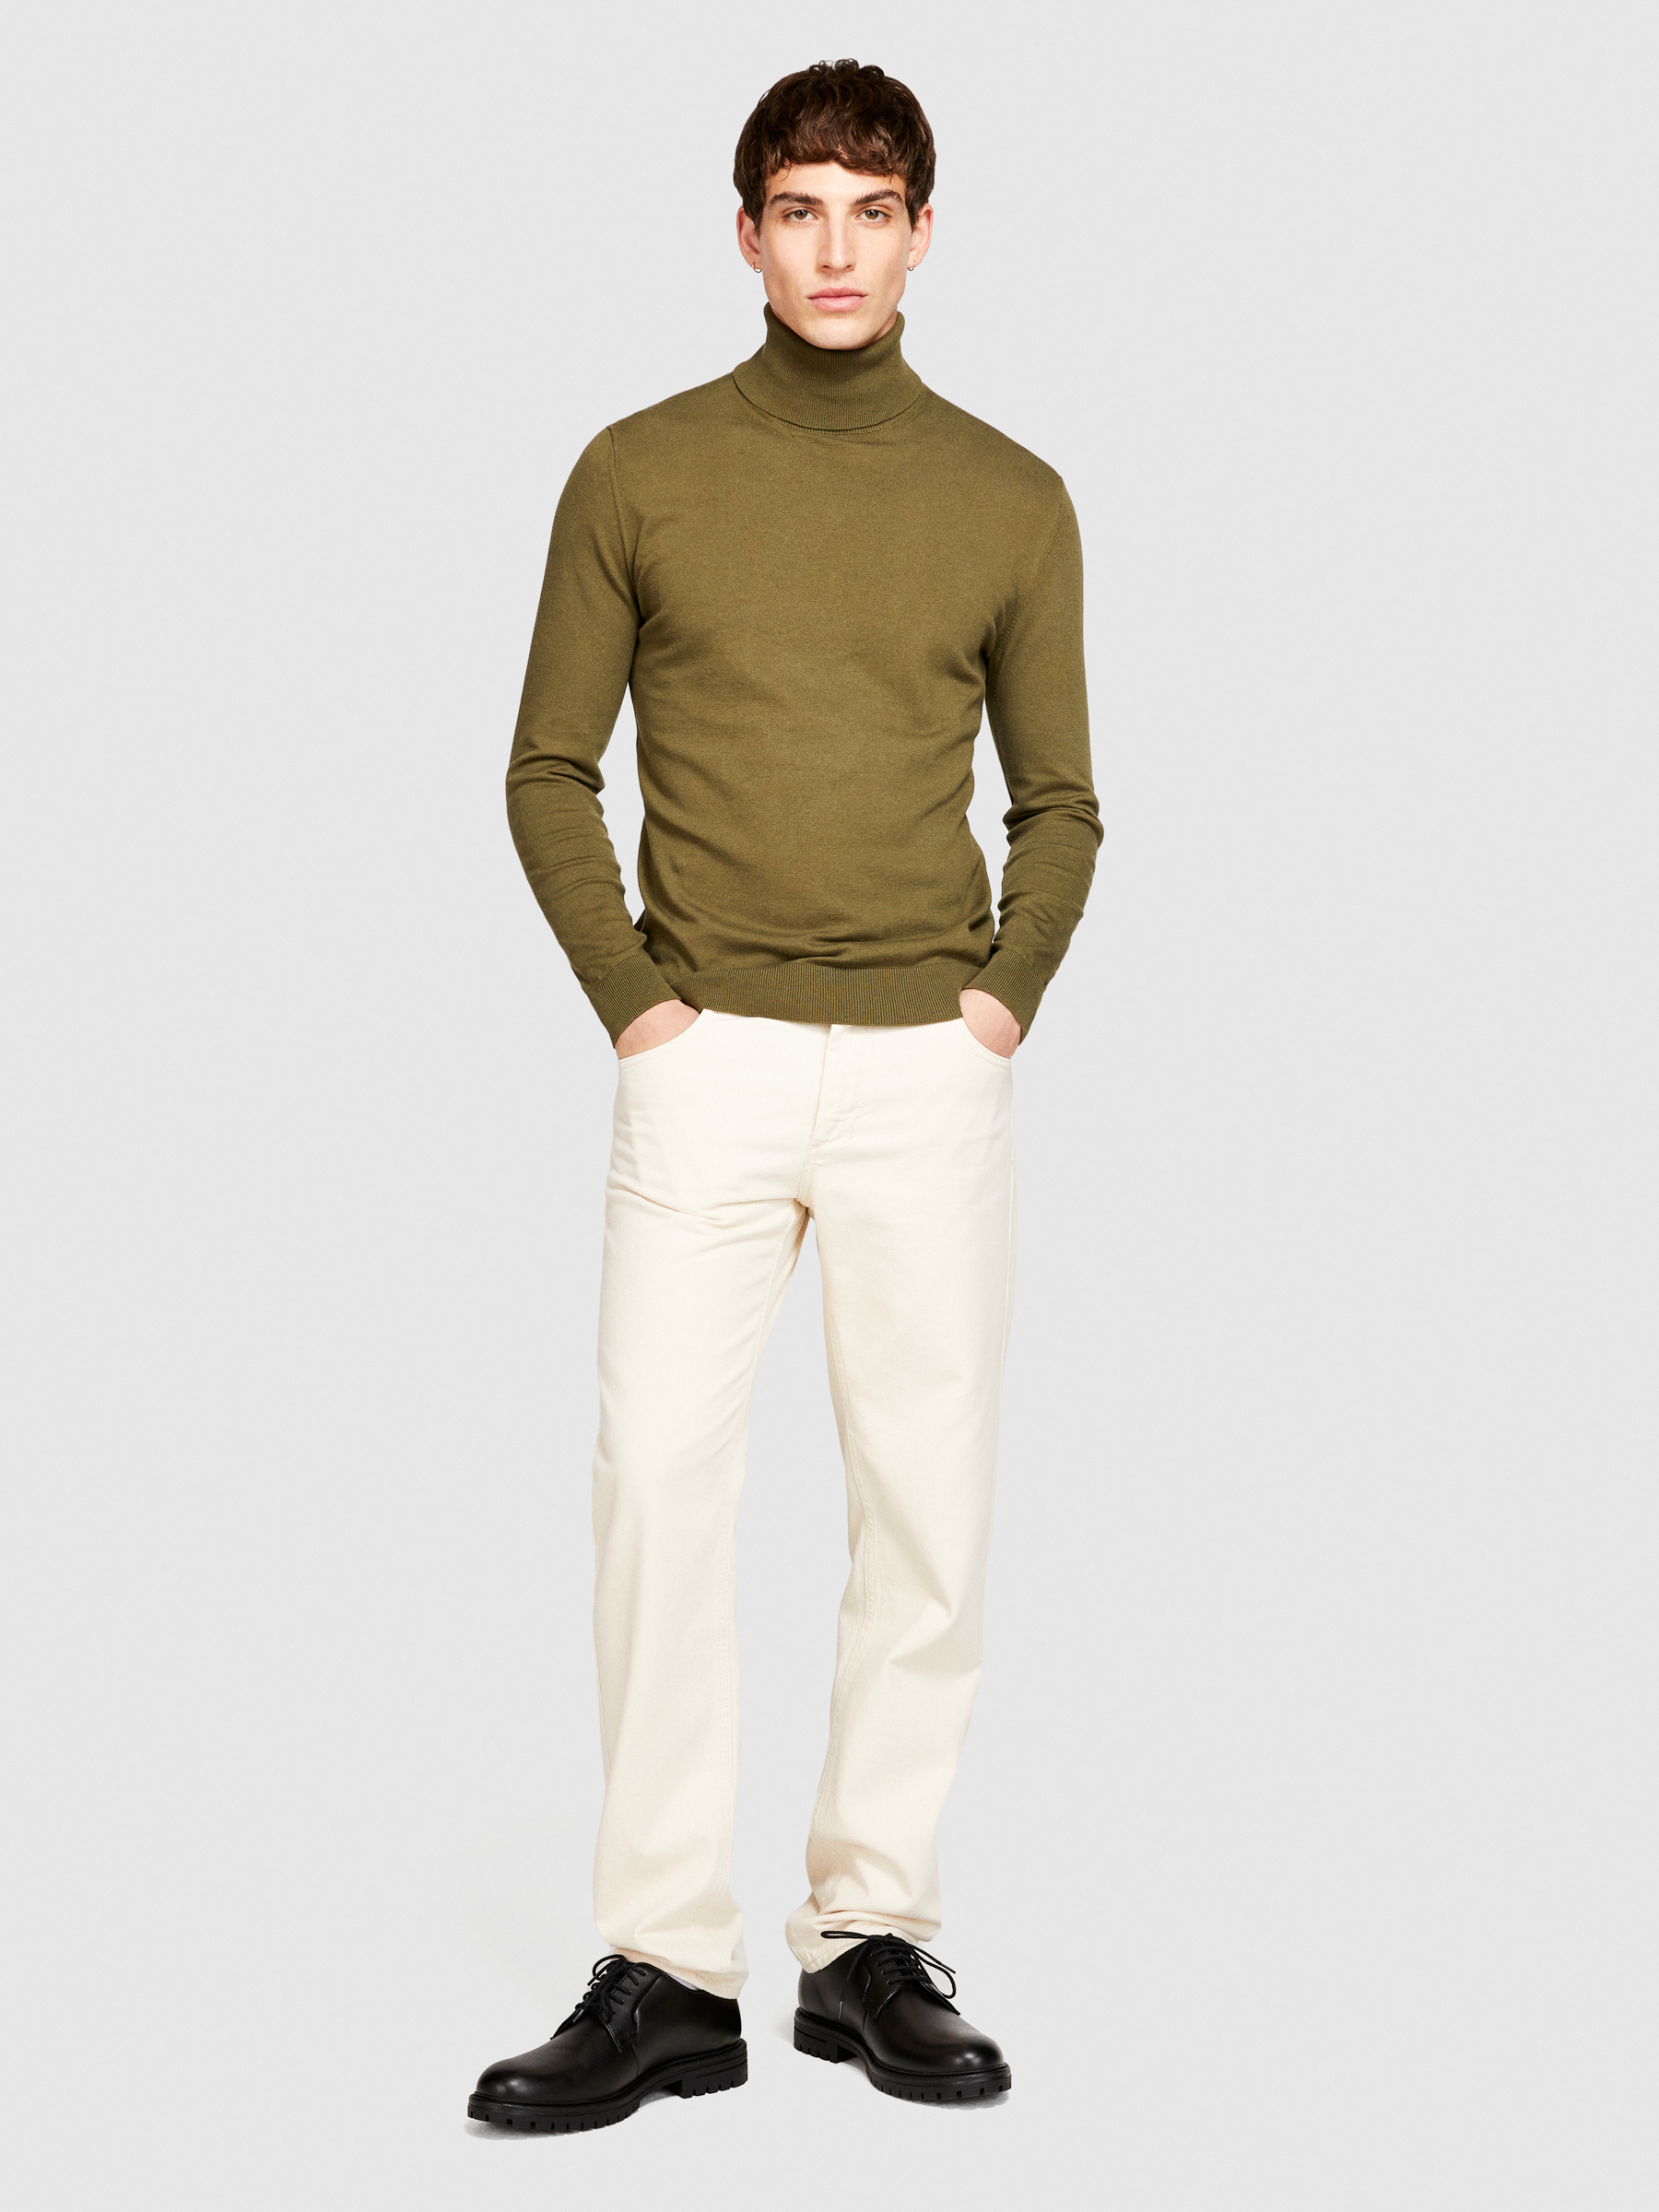 Sisley - Solid Colored Sweater With High Collar, Man, Military Green, Size: L